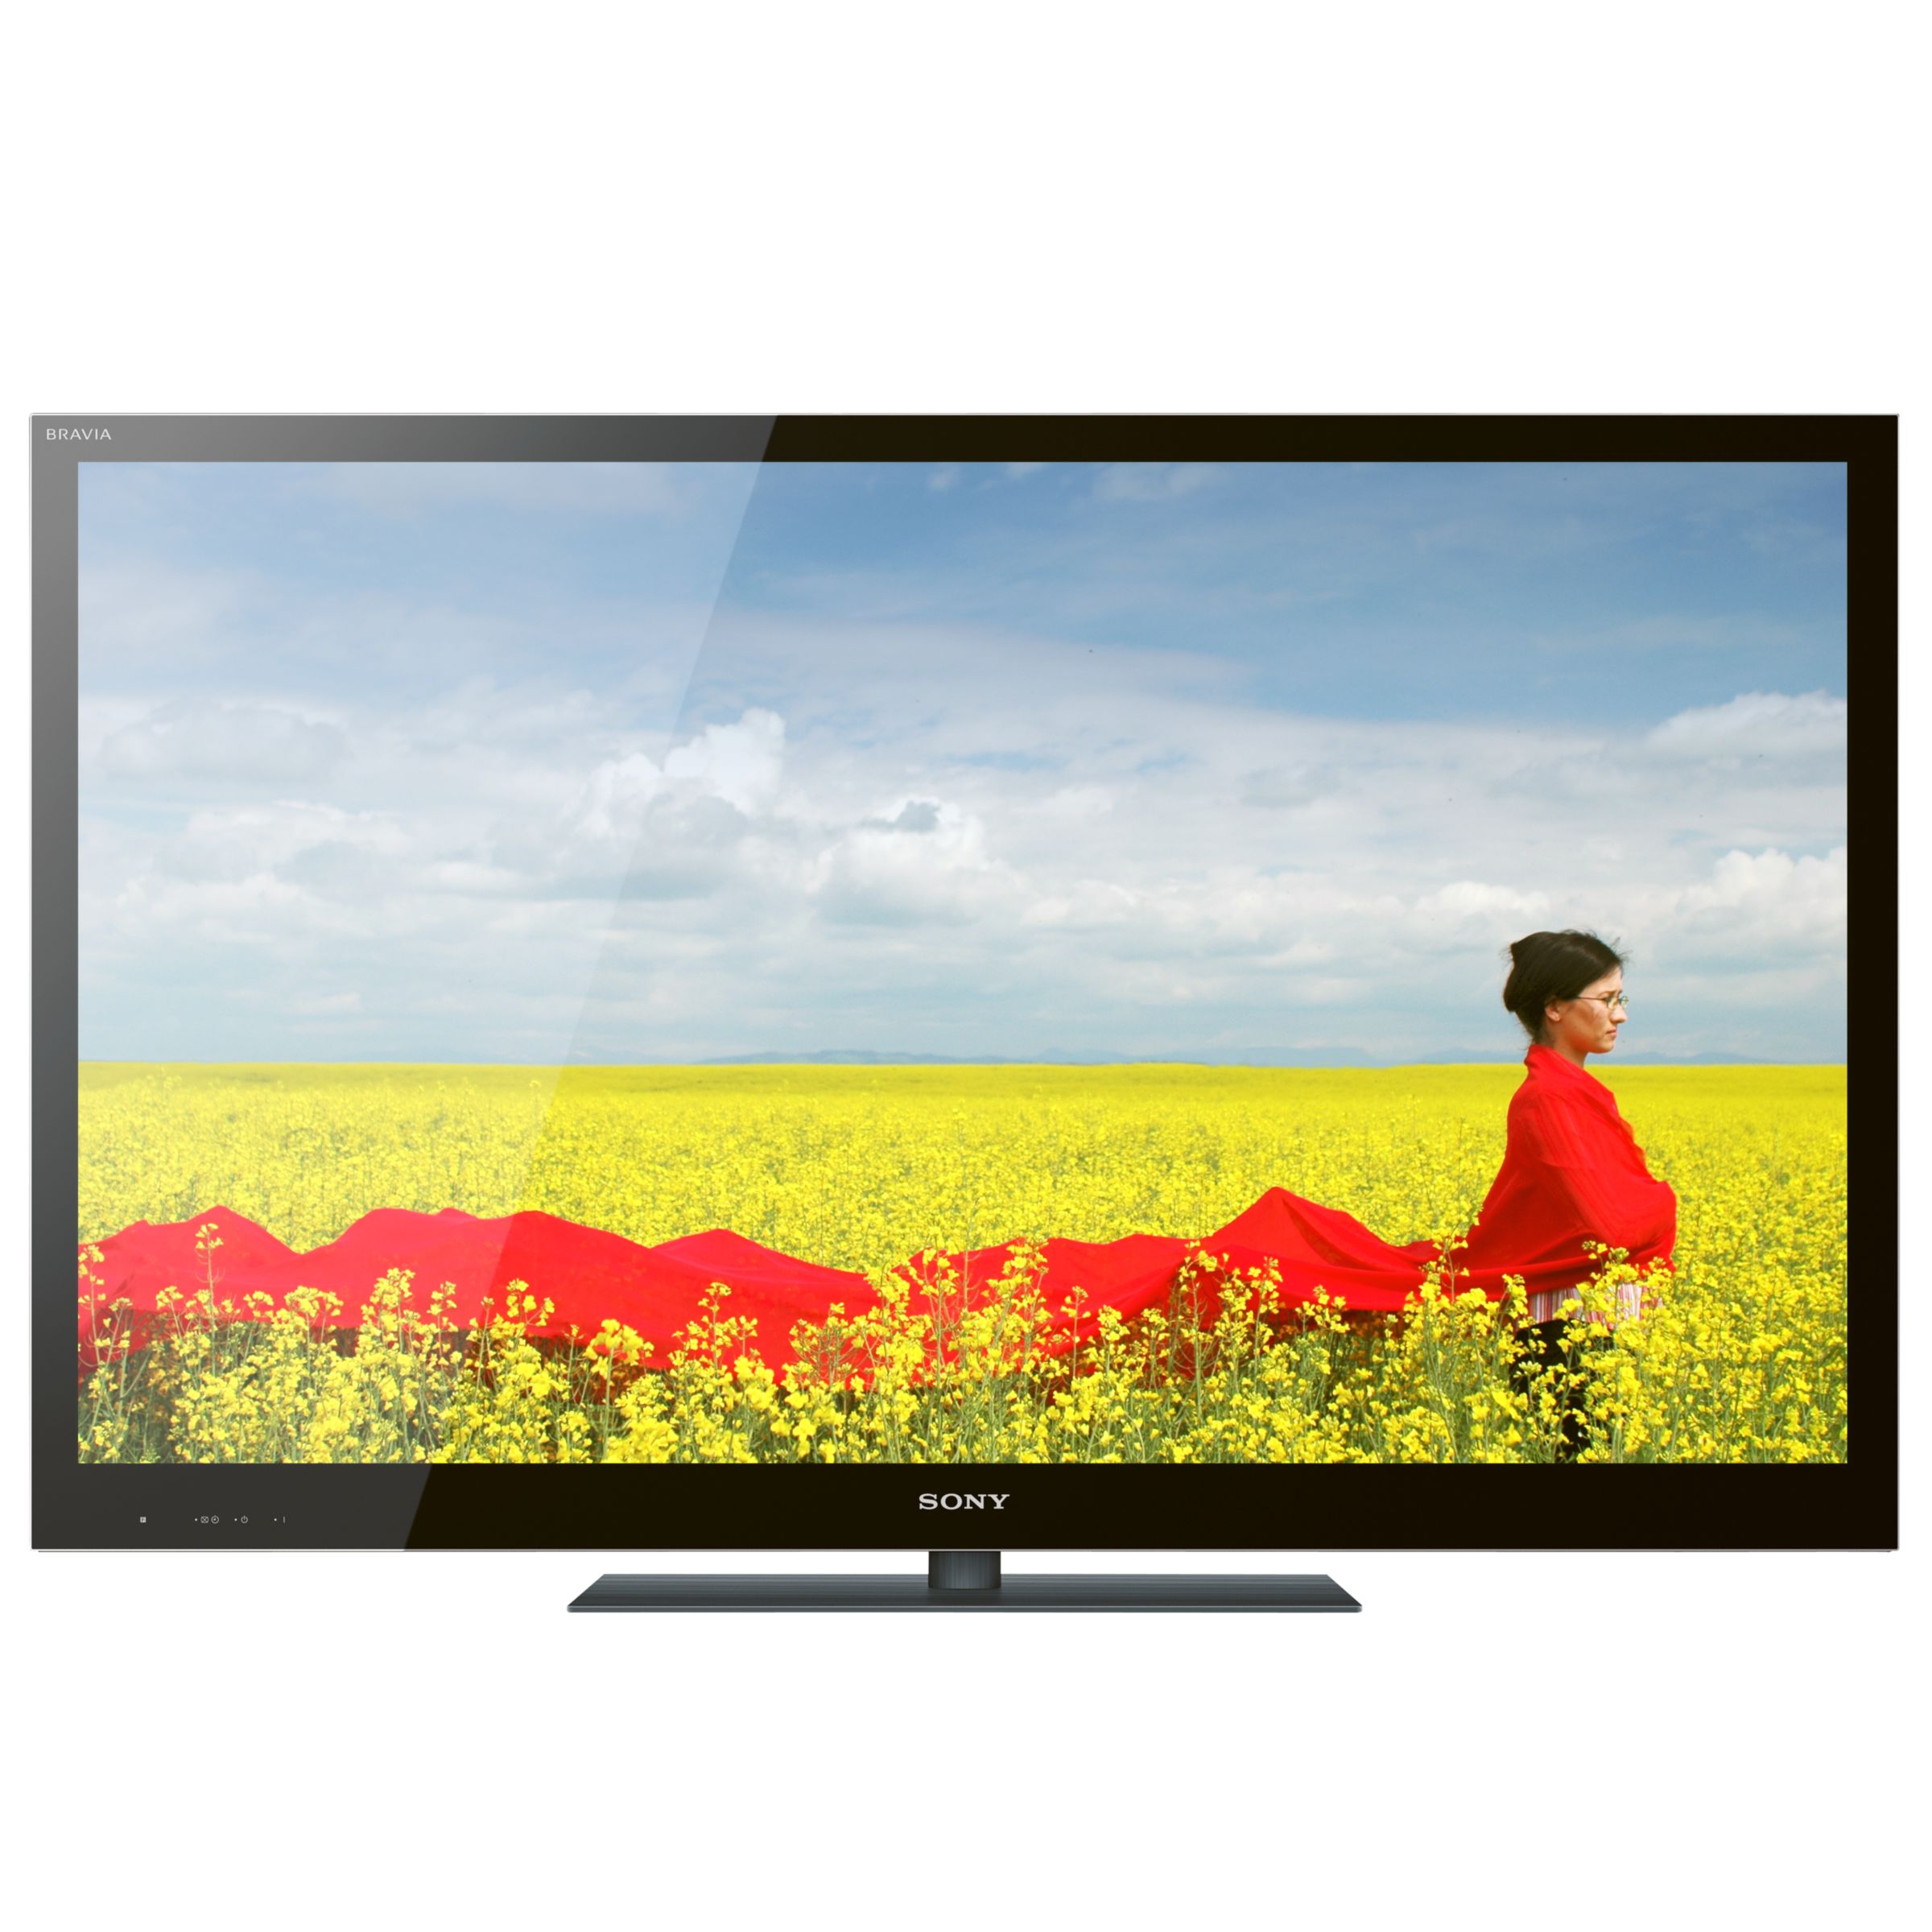 Sony Bravia KDL46NX713 LED HD 1080p 3D Capable Television, 46 inch with Built-in Freeview HD at John Lewis